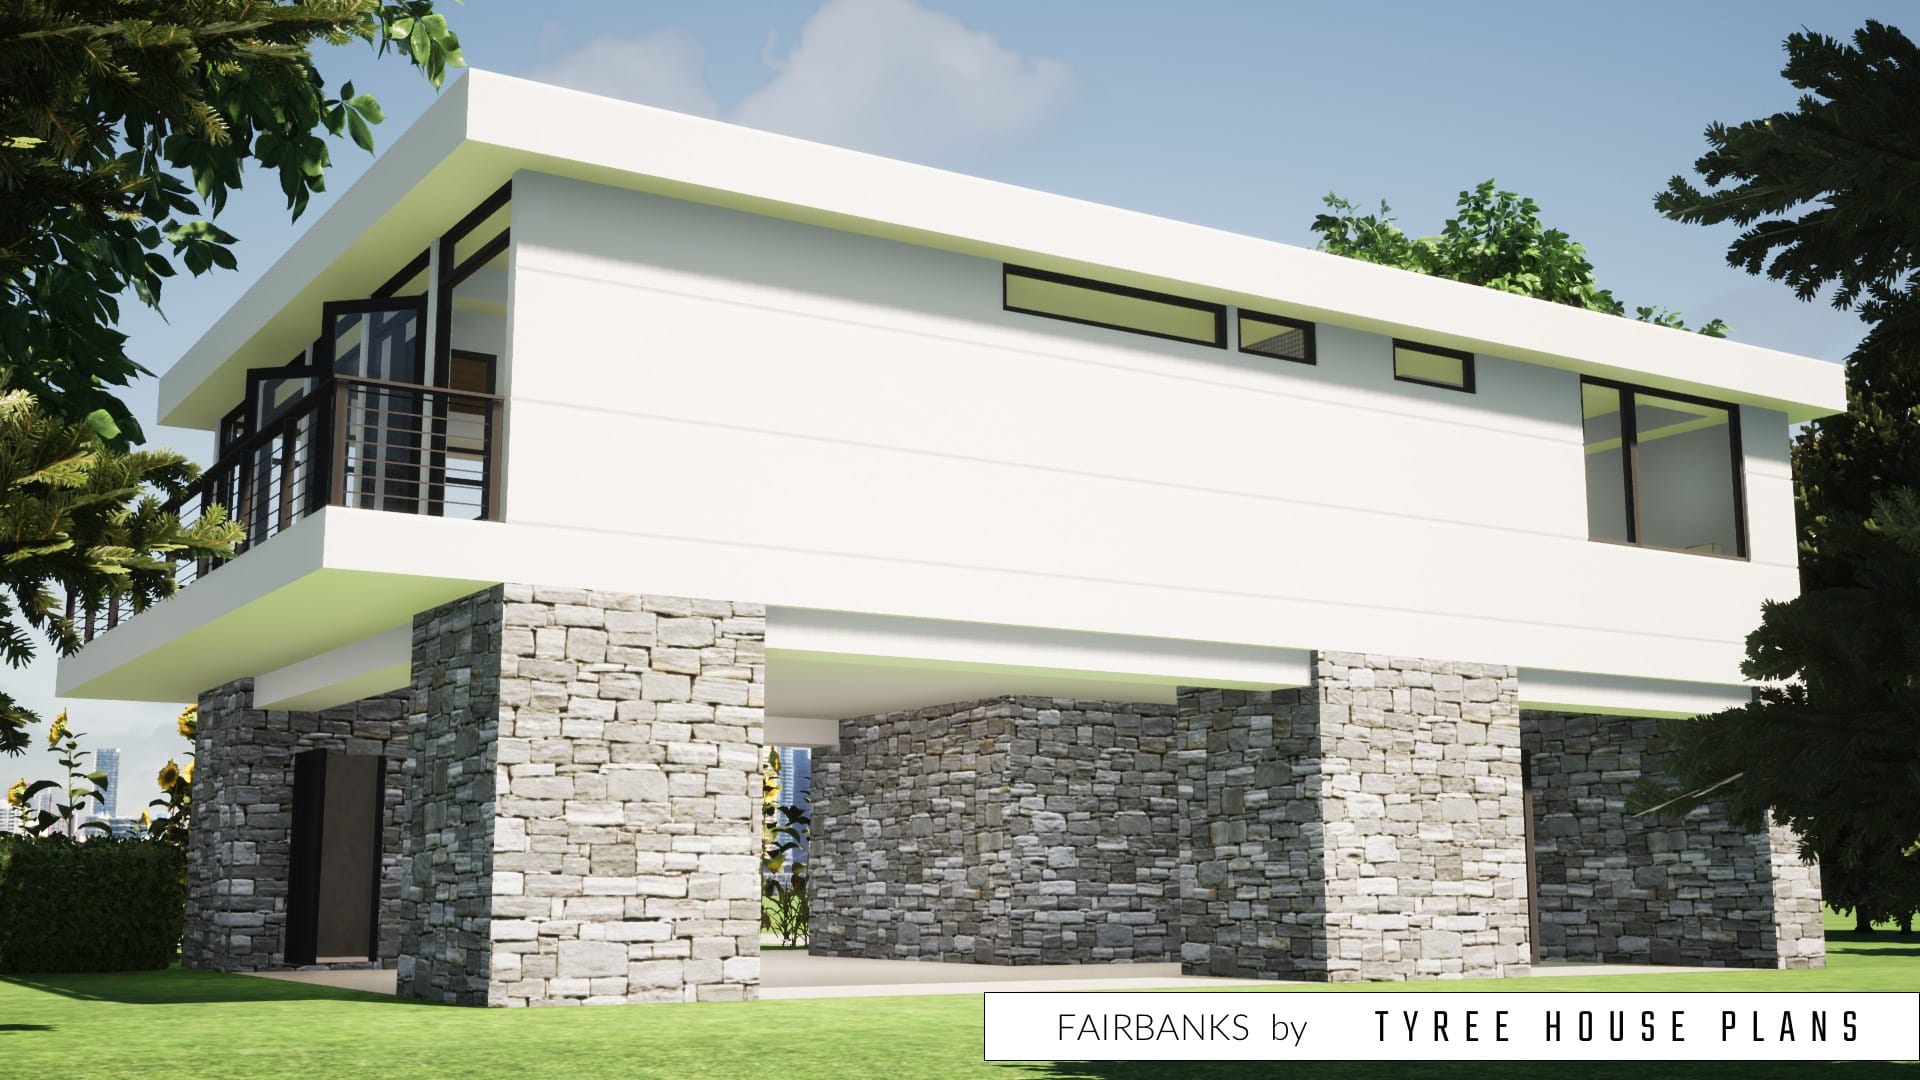 Fairbanks by Tyree House Plans